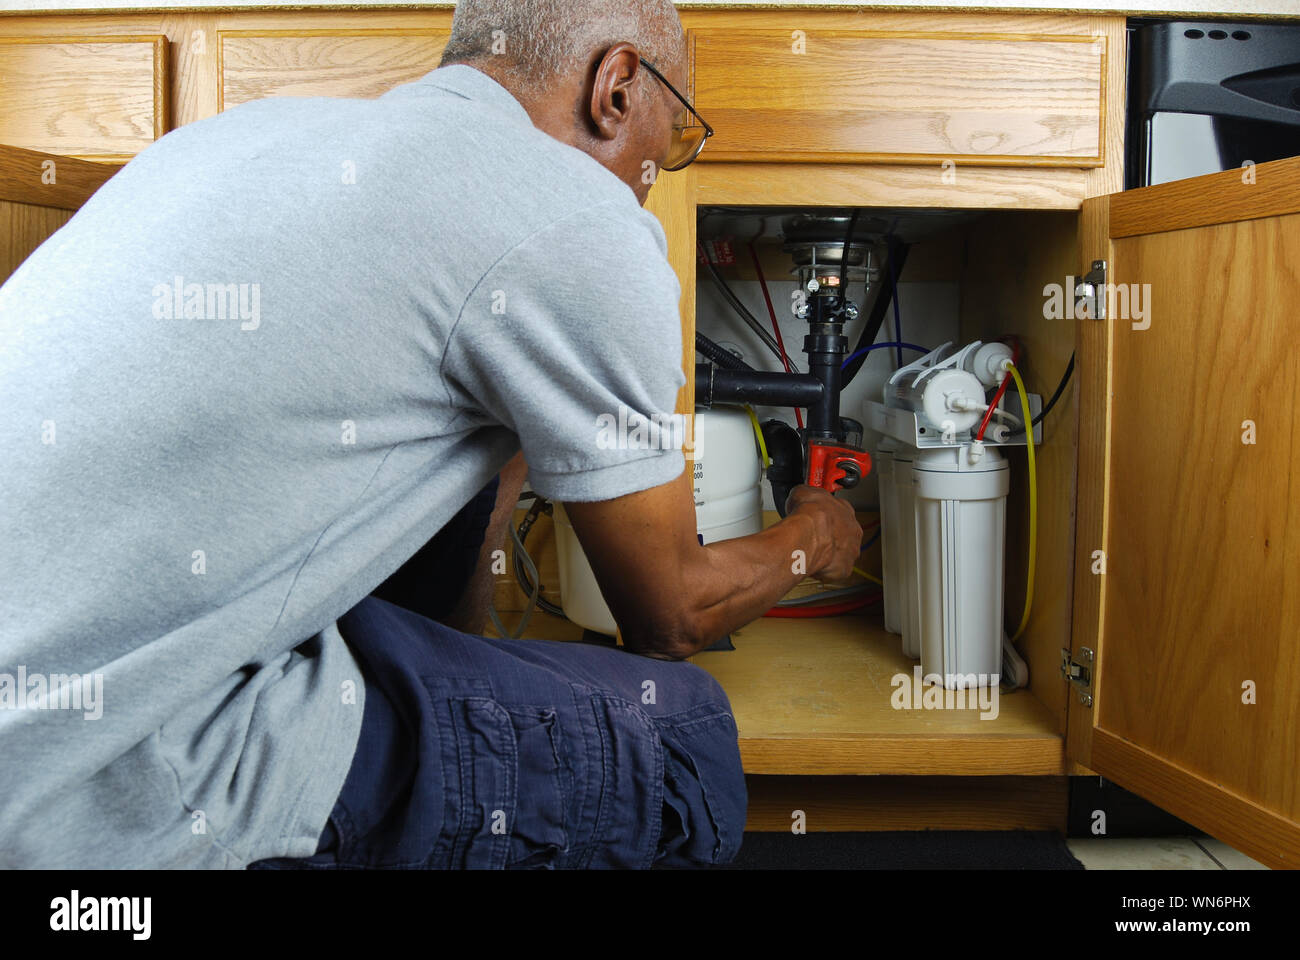 Mature Man With Wrench Tighten Pipes Under Sink At Home Stock Photo